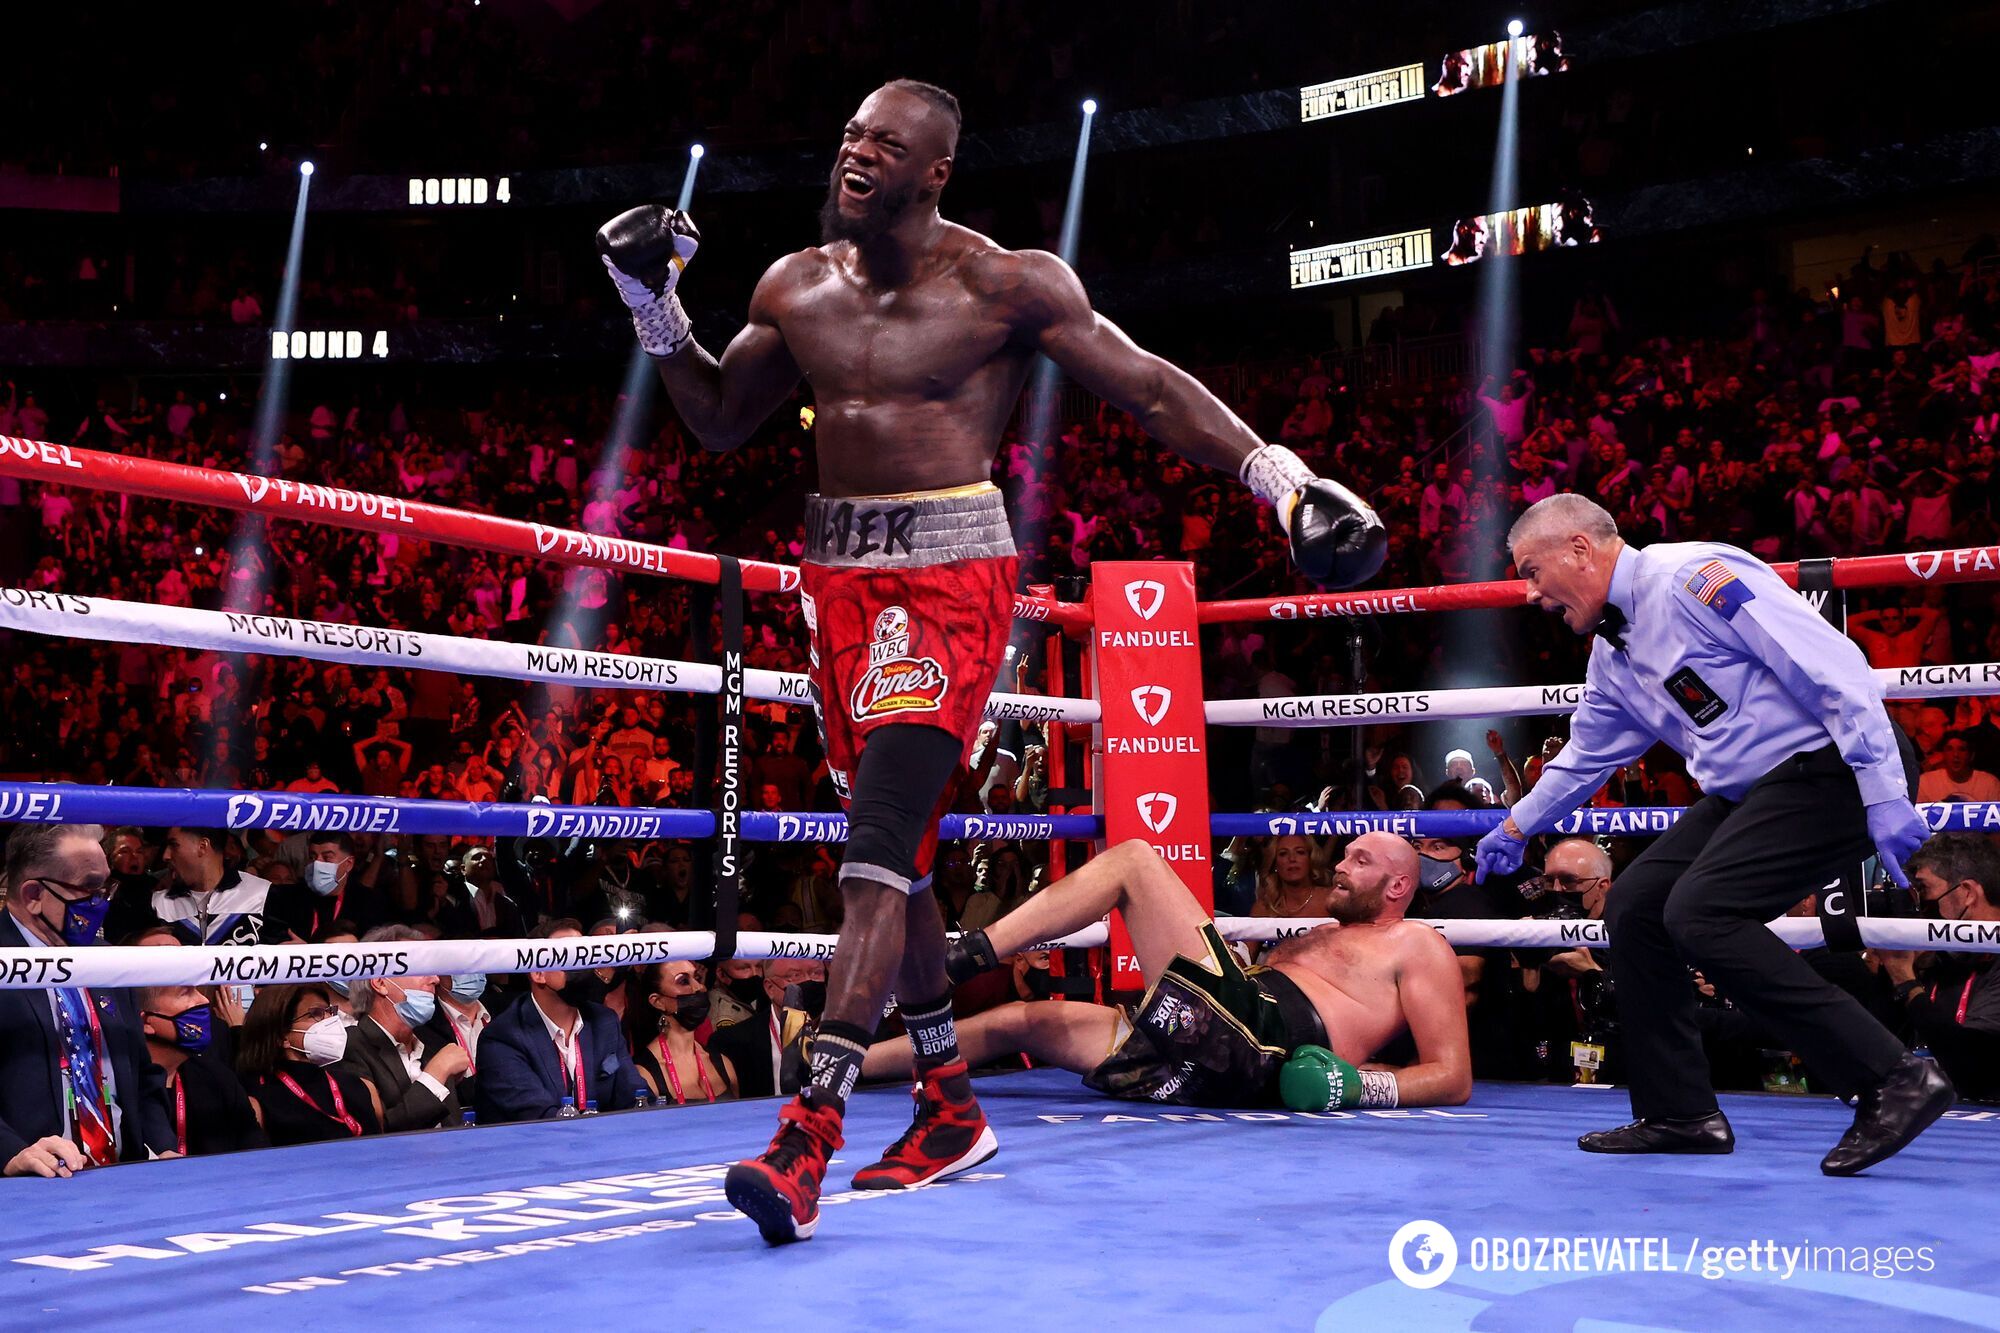 Wilder missed a chance to end the fight early.